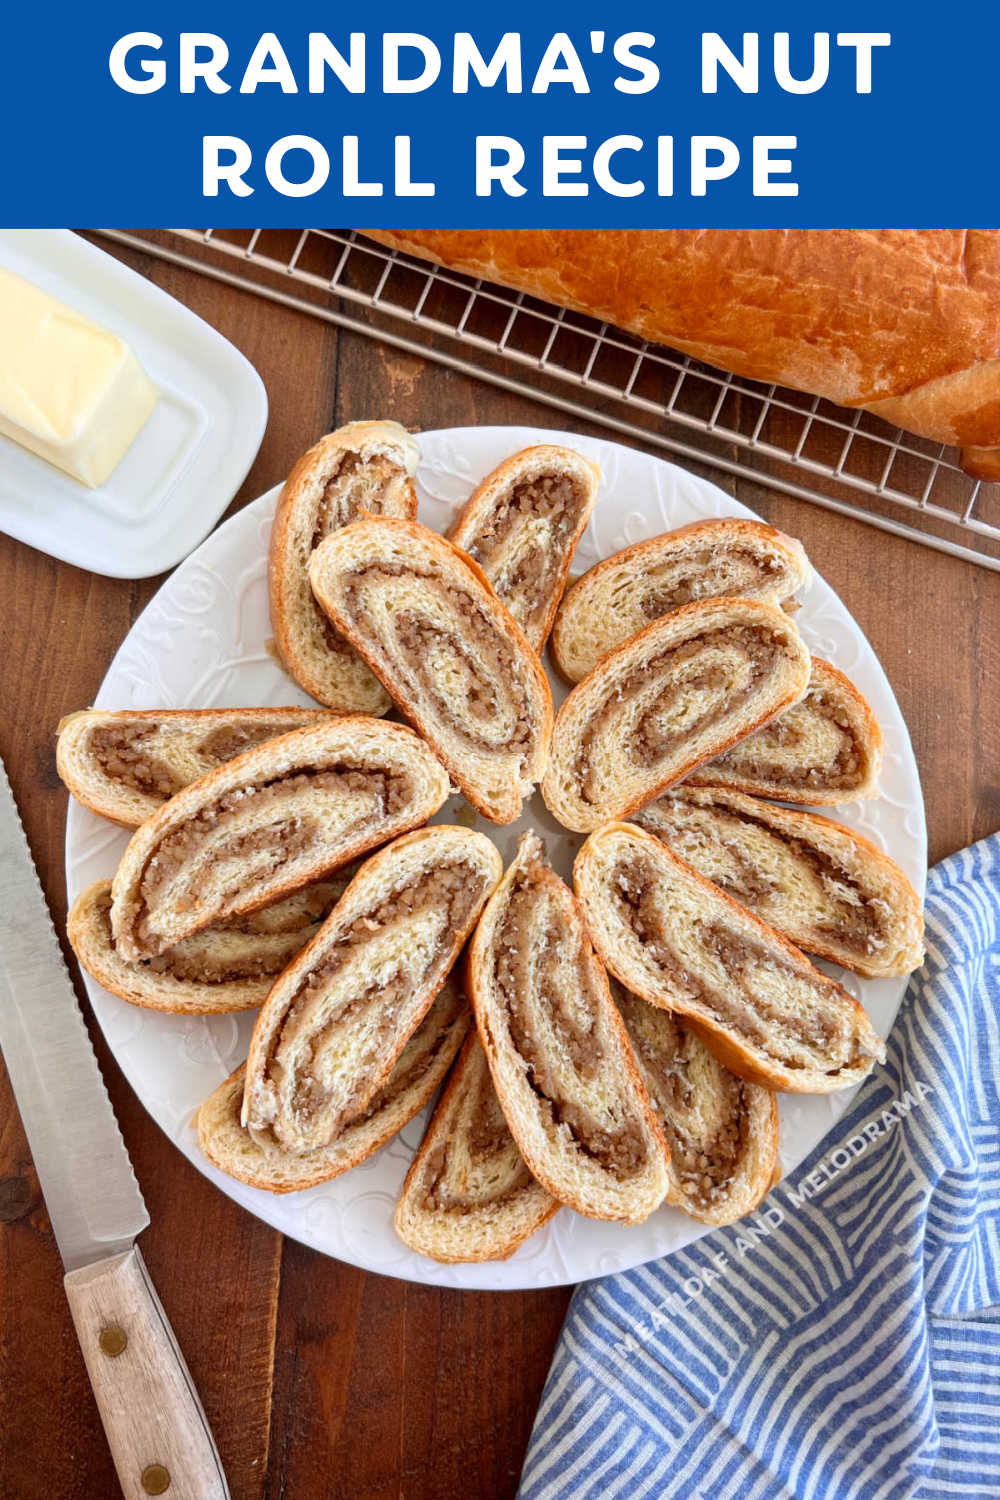 Grandma's Nut Roll Recipe makes a delicious sweet bread filled with ground walnuts. Homemade Slovak nut rolls are perfect for the holidays and traditional for both Christmas and Easter. Enjoy these Pittsburgh nut rolls! via @meamel